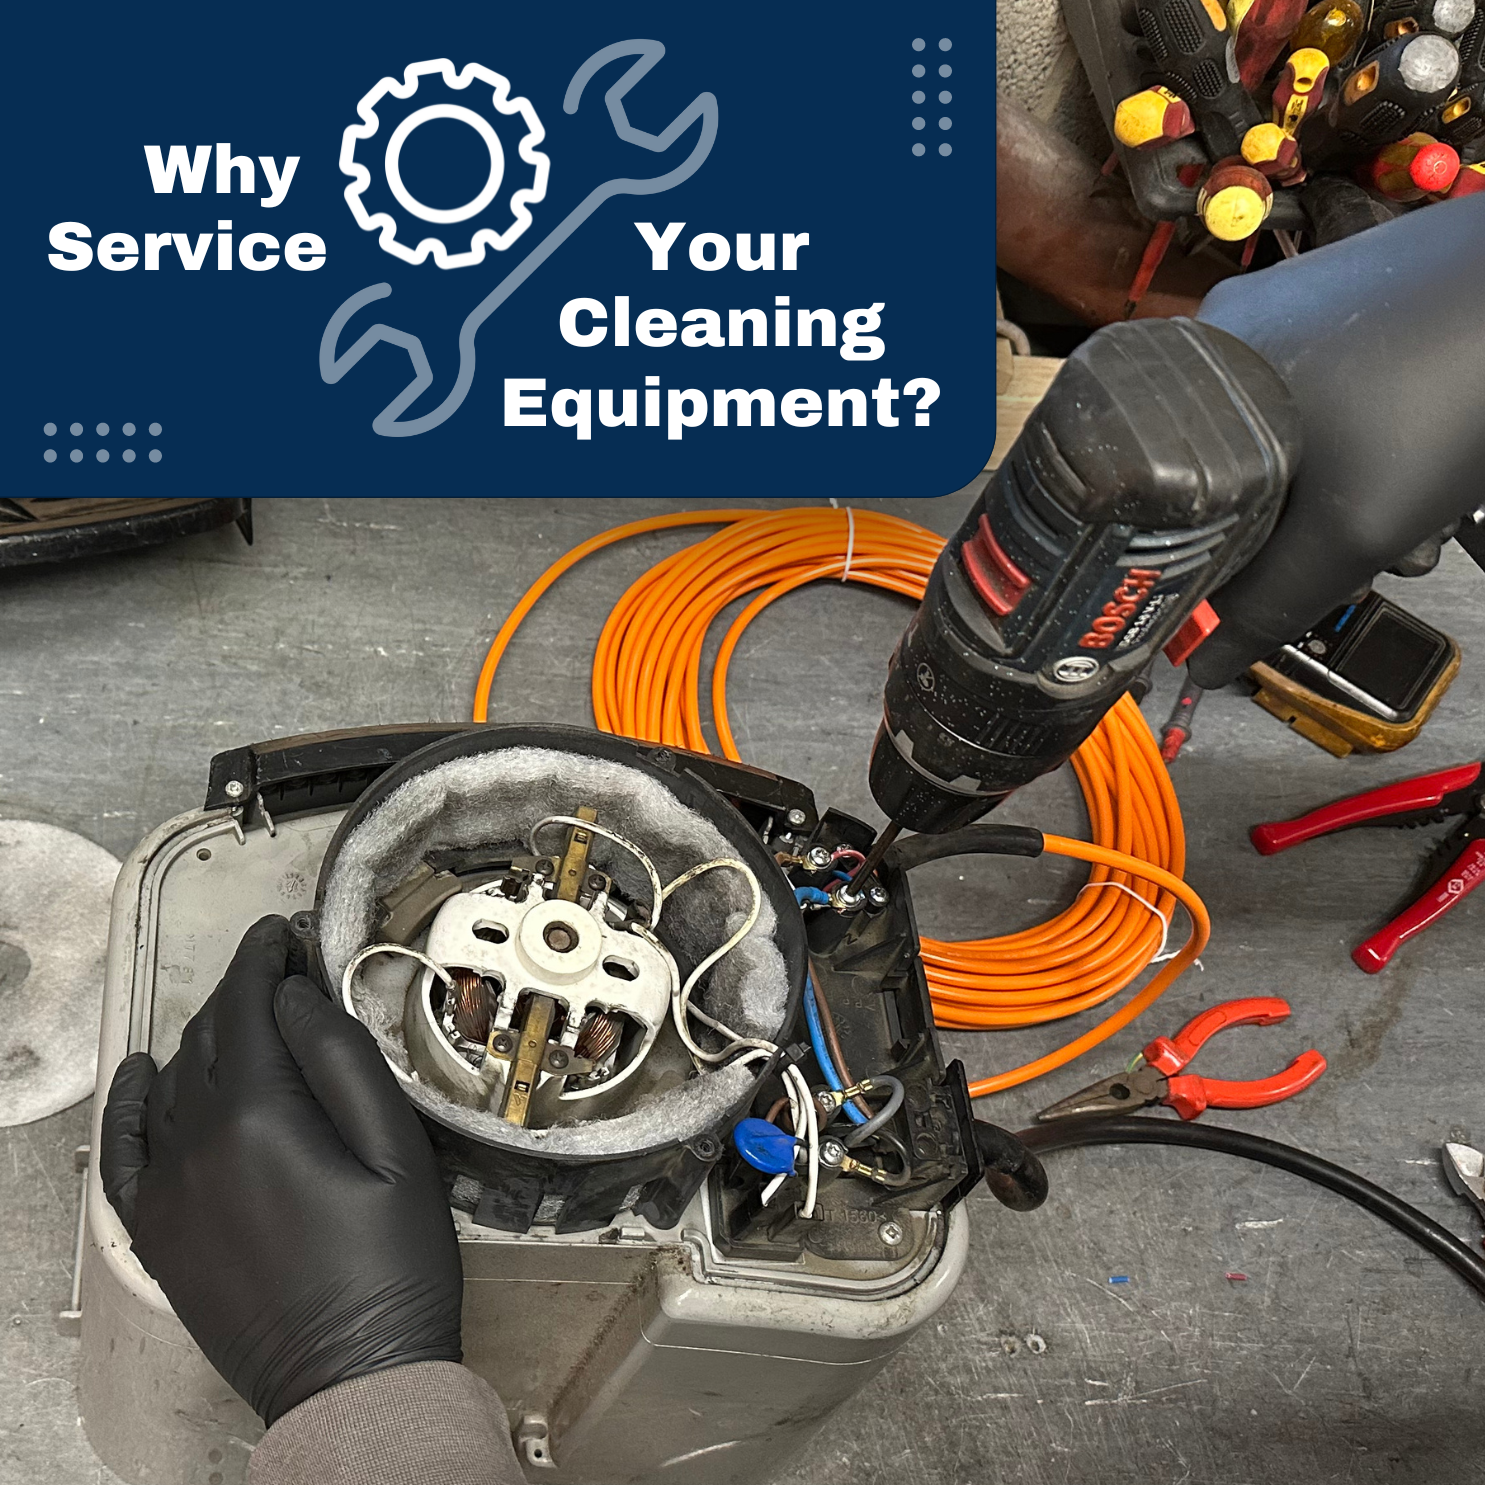 Doing This Regularly Can Save Your Cleaning Equipment (and Money)!